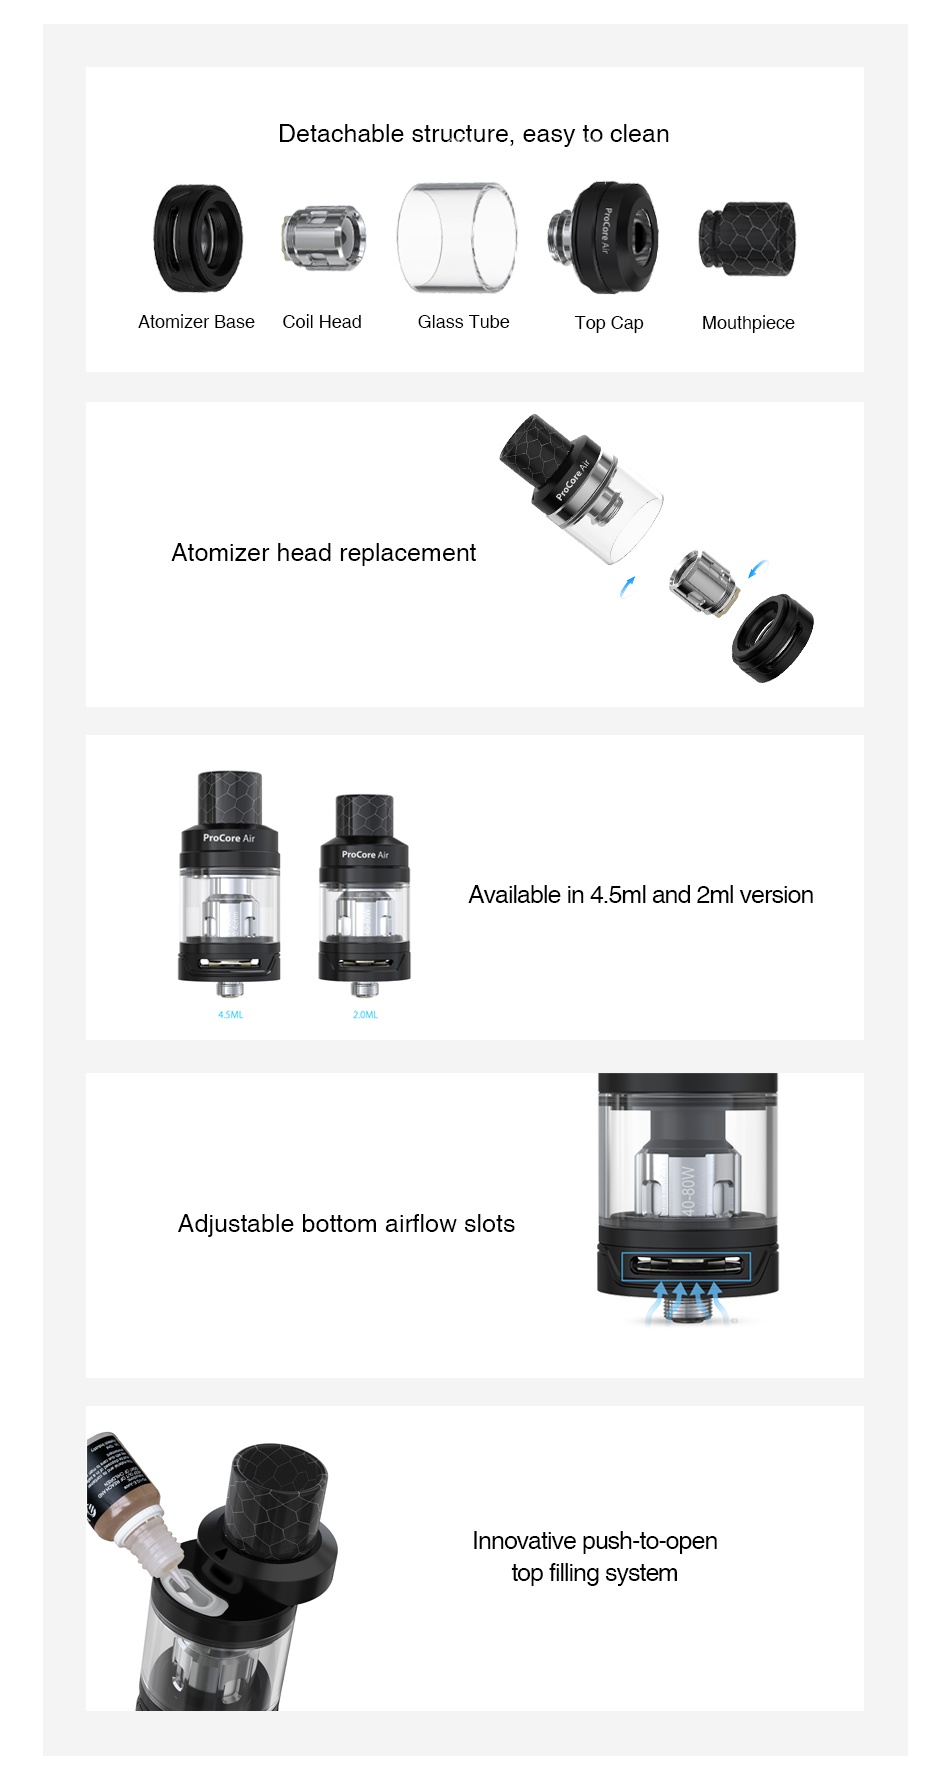 Joyetech ProCore Air Atomizer 2ml/4.5ml Detachable structure  easy to clean Atomizer base Coil head Glass tube Mouthpiece Atomizer head replacemen Pro Core Ai Available in 4  5ml and 2ml version Adiustable bottom airflow slots nno e pusn to open top filling system